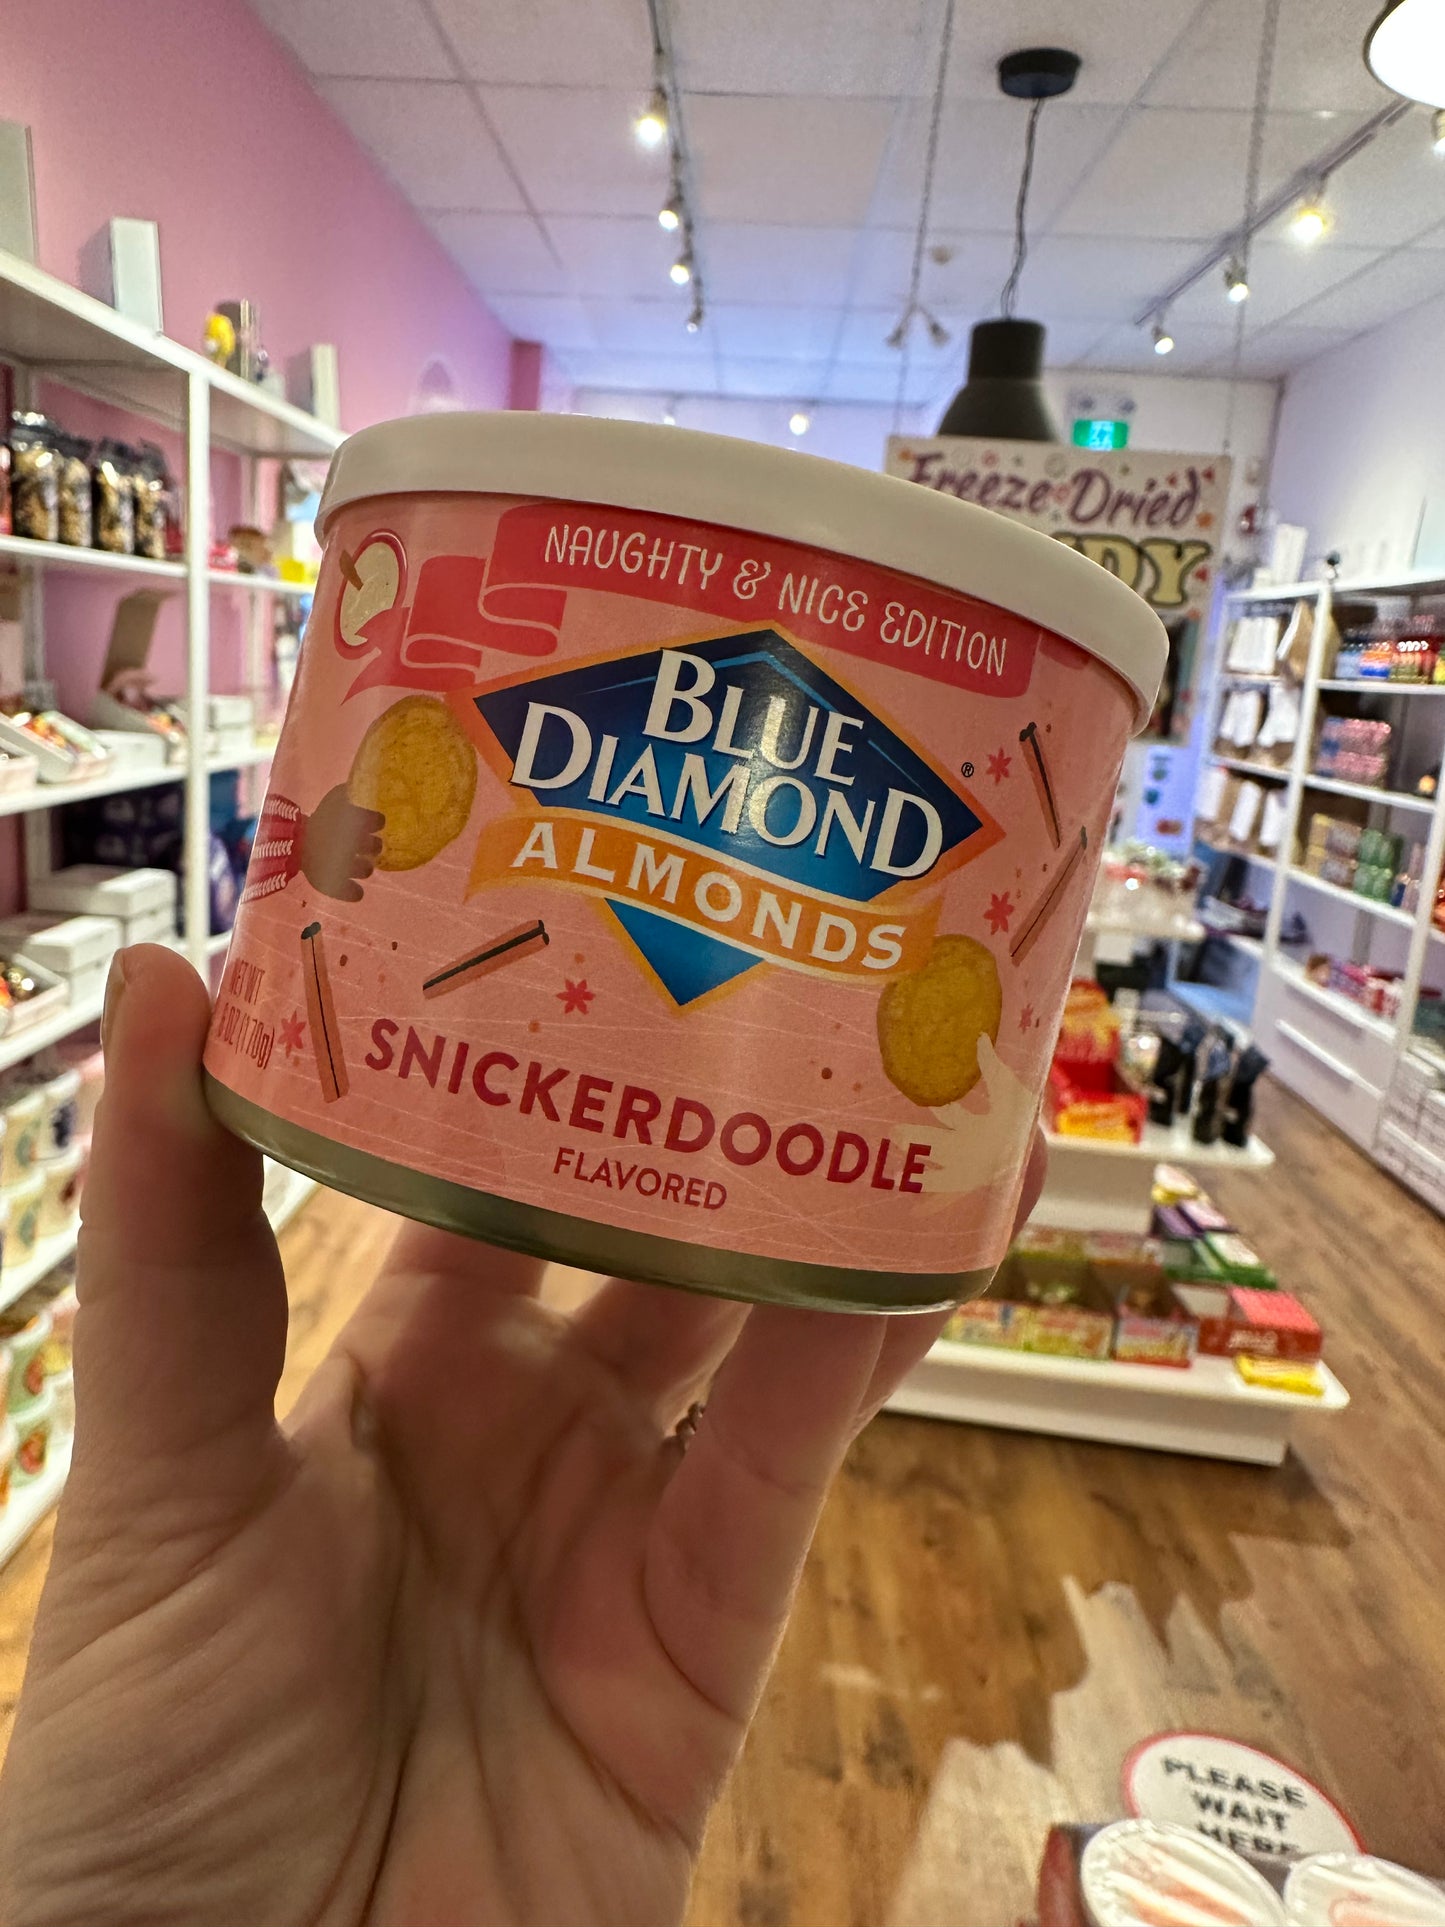 Blue Diamond Almonds - Naughty & Nice Edition - Snickerdoodle Flavored